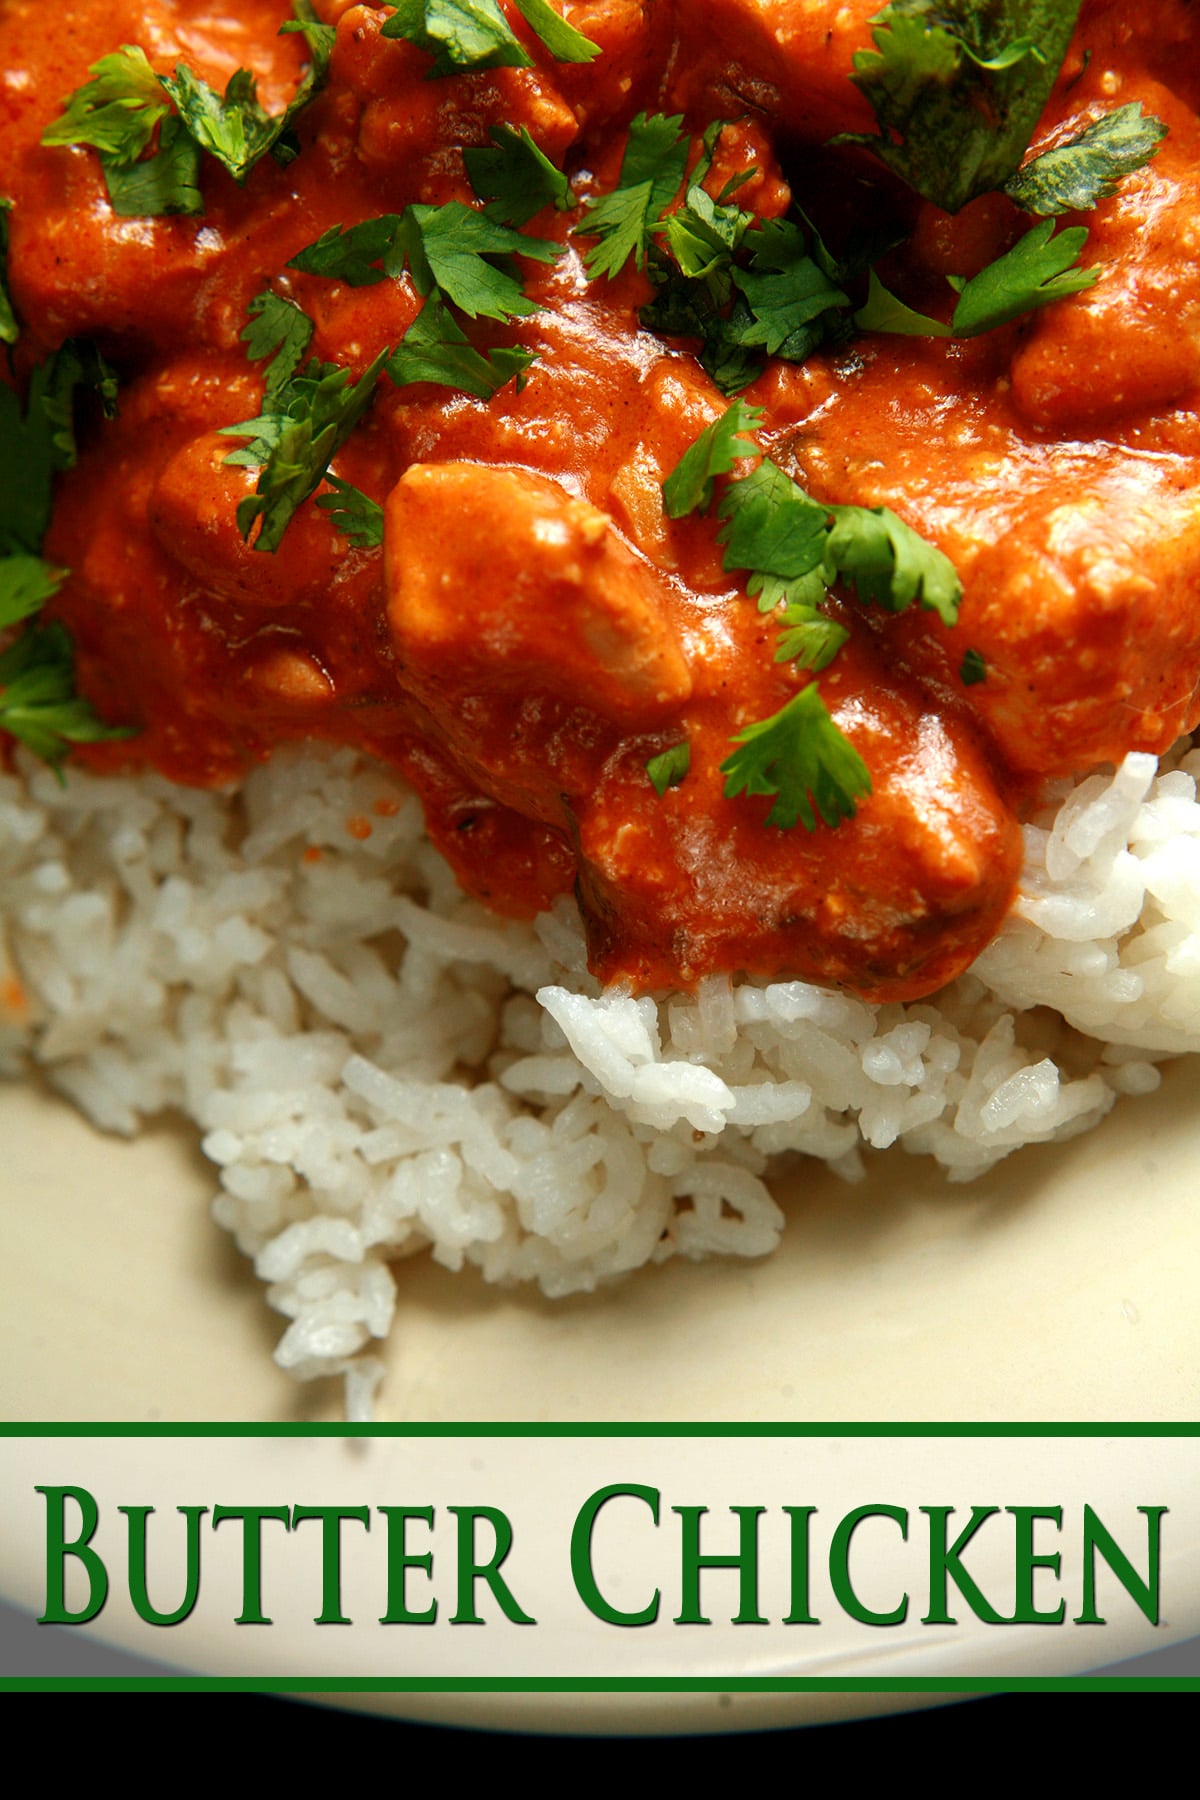 A close up view of Butter Chicken - Chicken in a  creamy tomato sauce, served over rice.